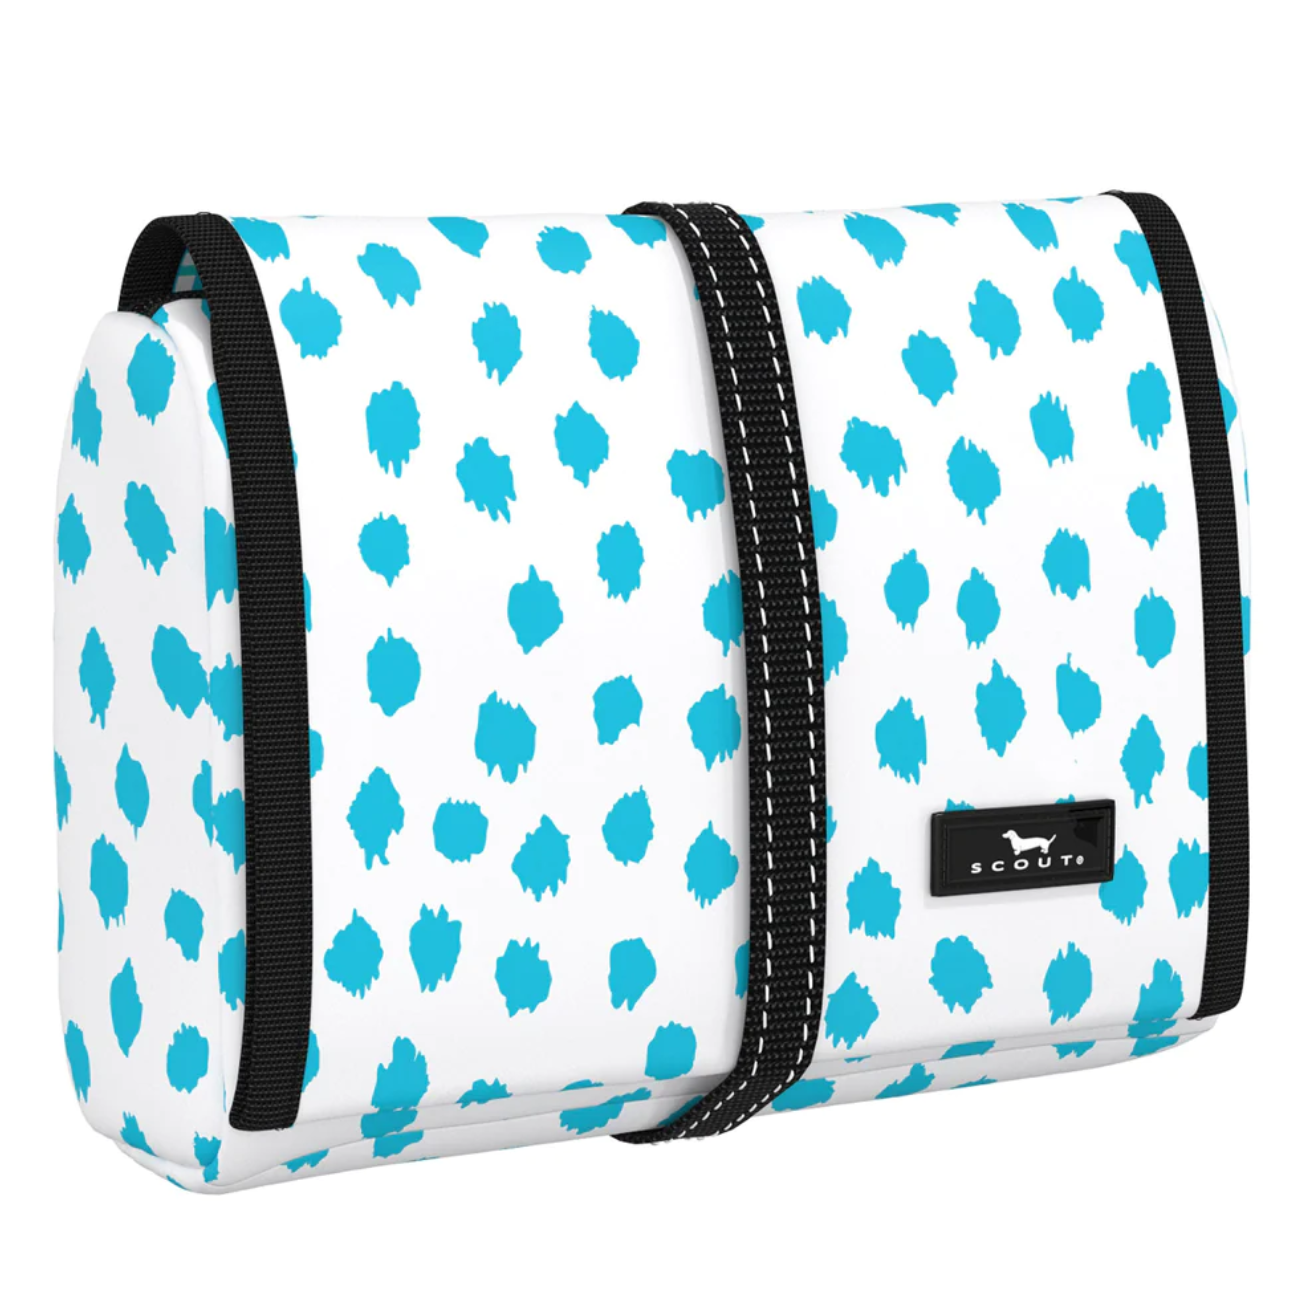 Scout Beauty Burrito Toiletry Bag Travel Accessories in Puddle Jumper at Wrapsody